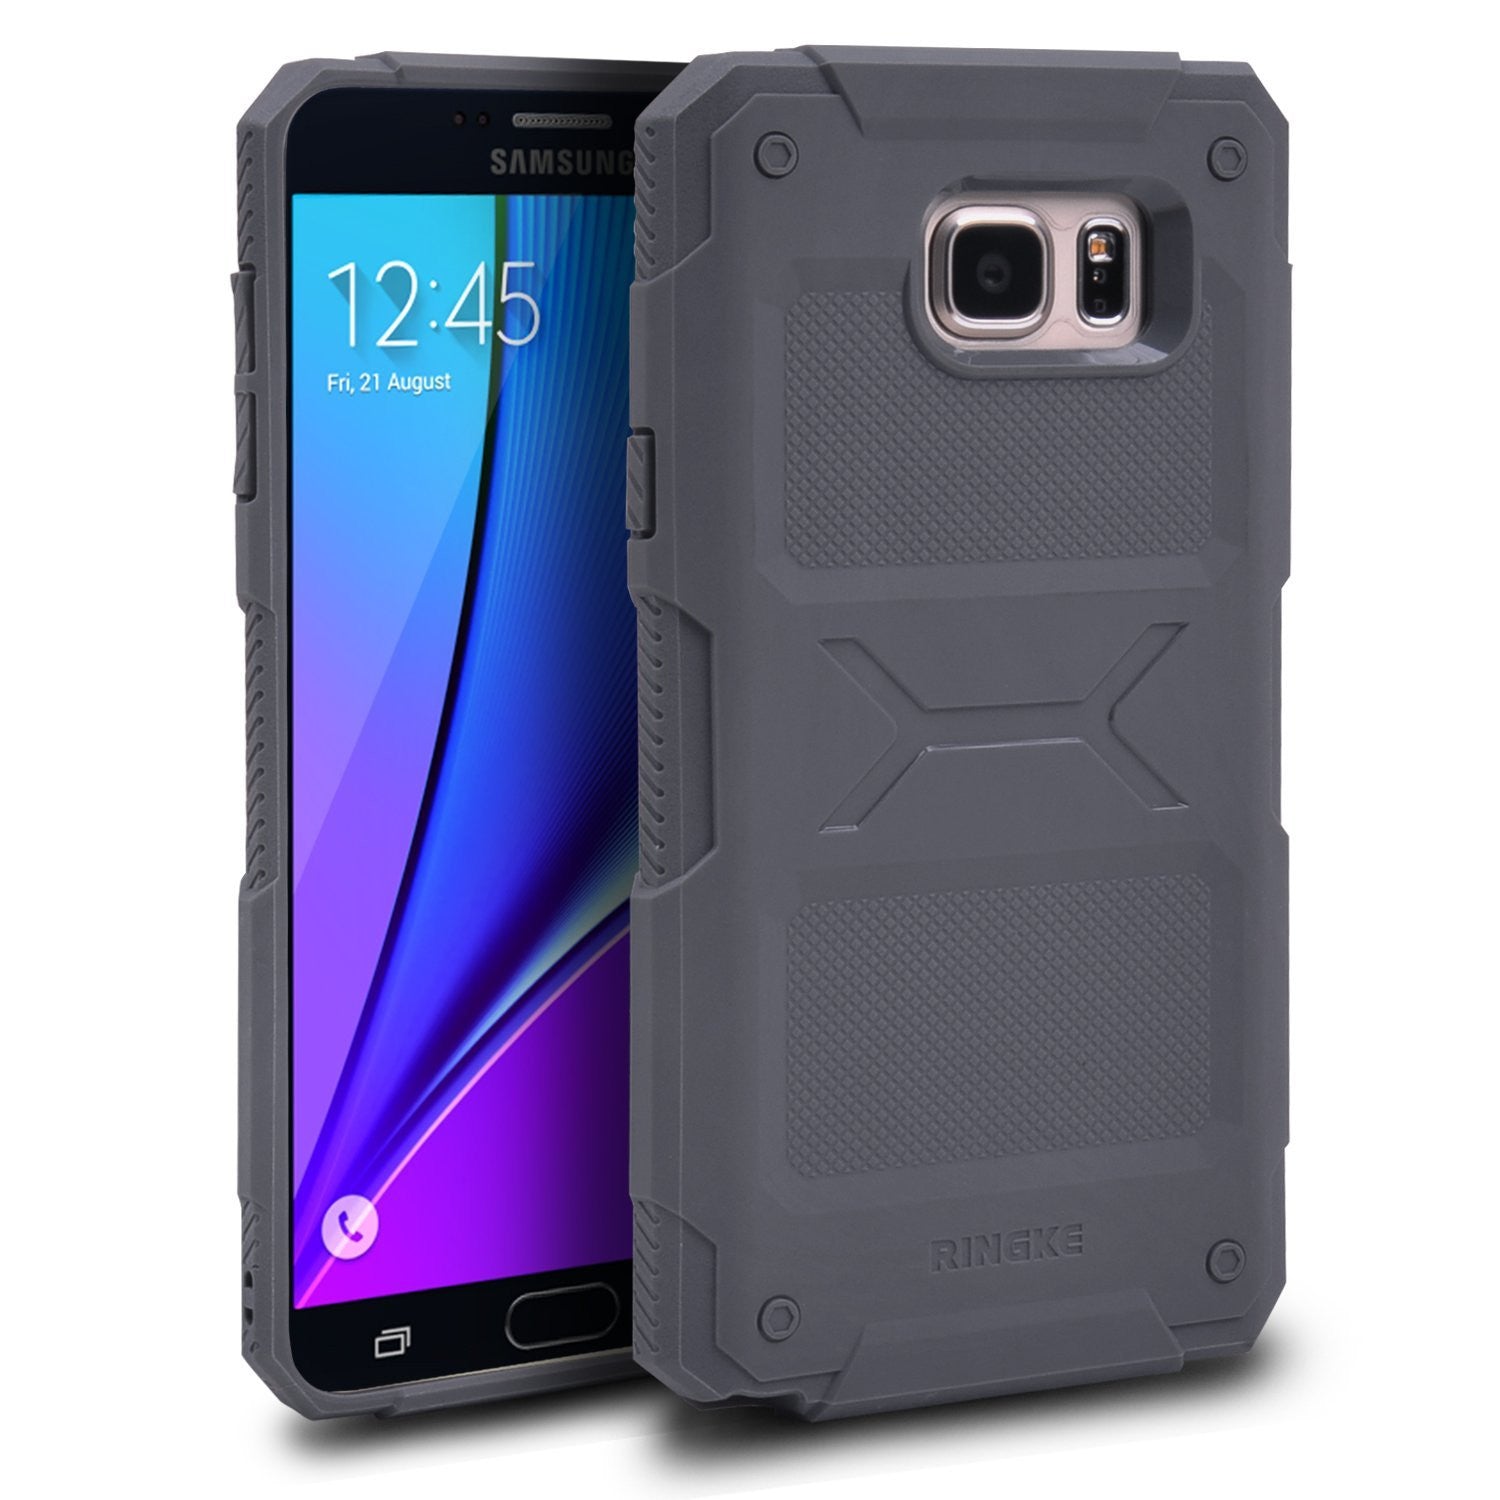 ringke rebel case for samsung galaxy note 5 gray